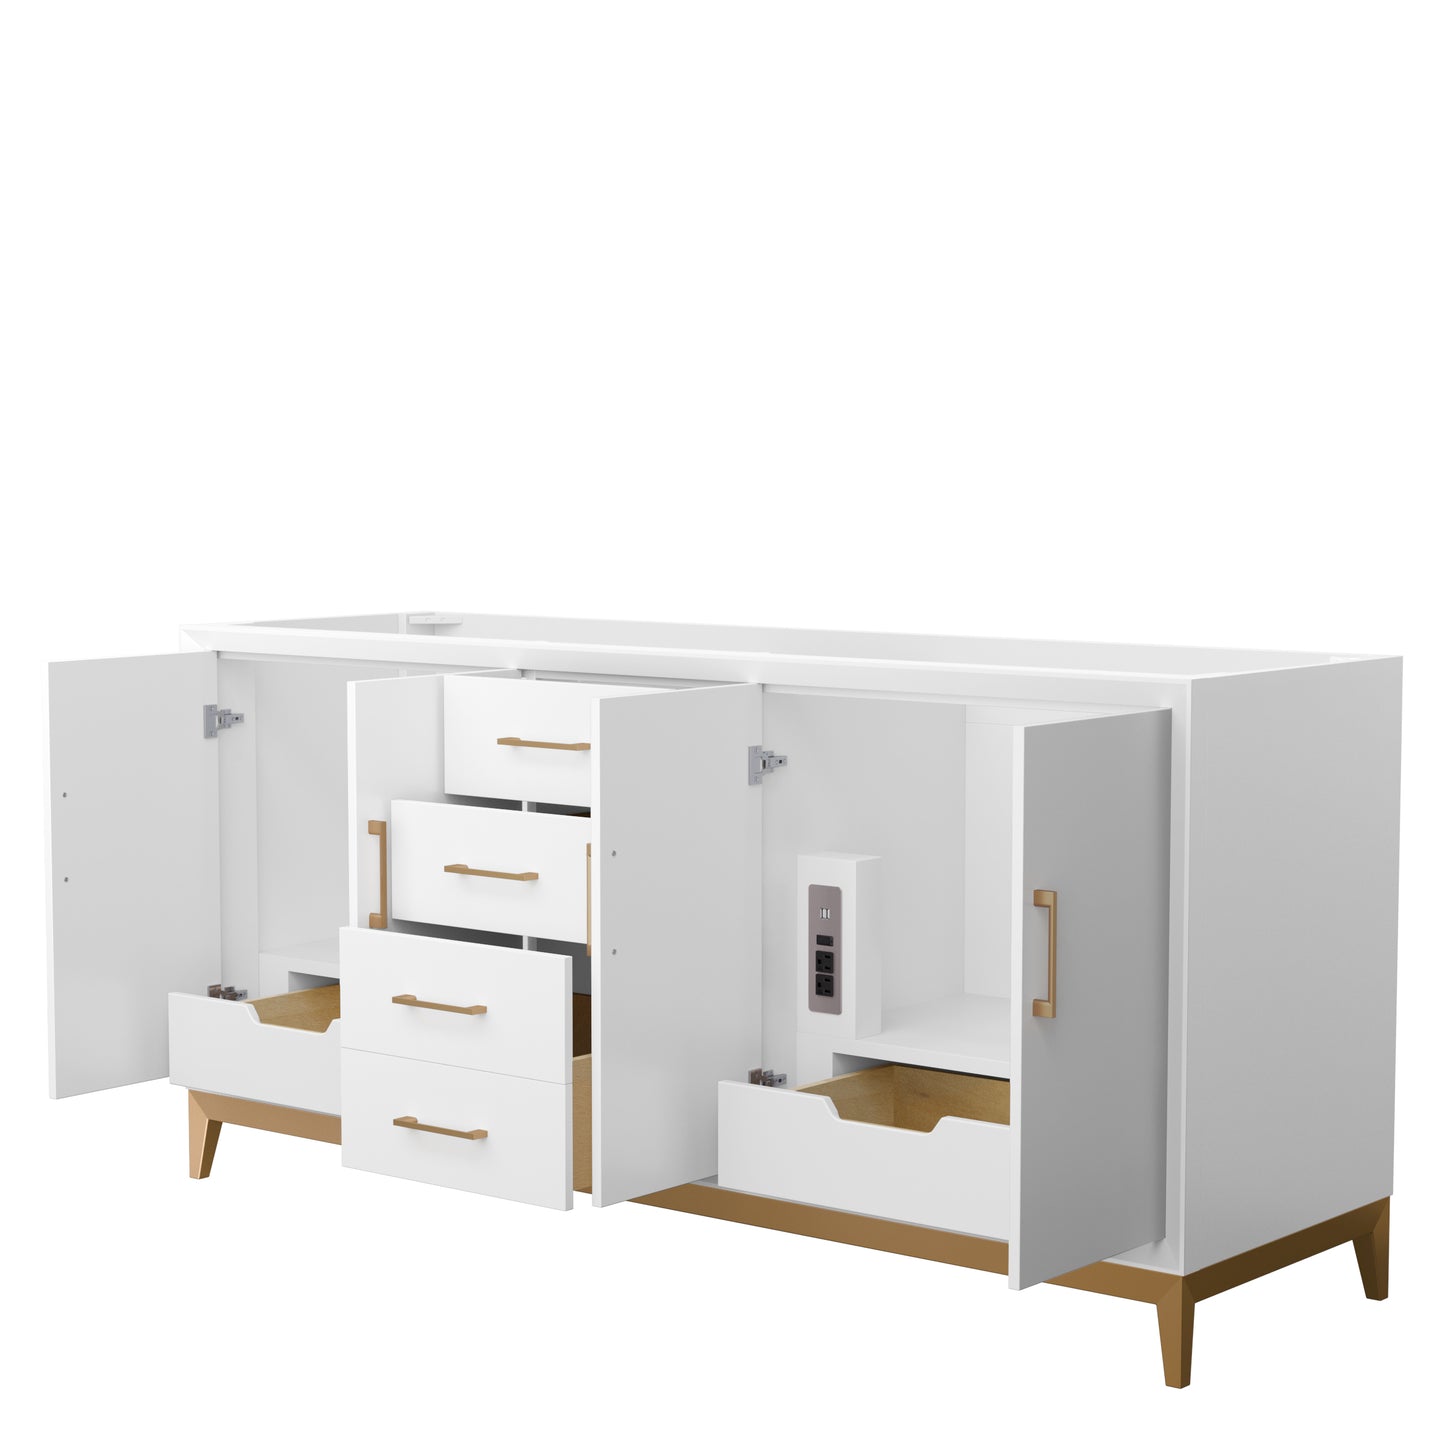 Amici 72" Double Bathroom Vanity in White, Base-Only, Optional Trim